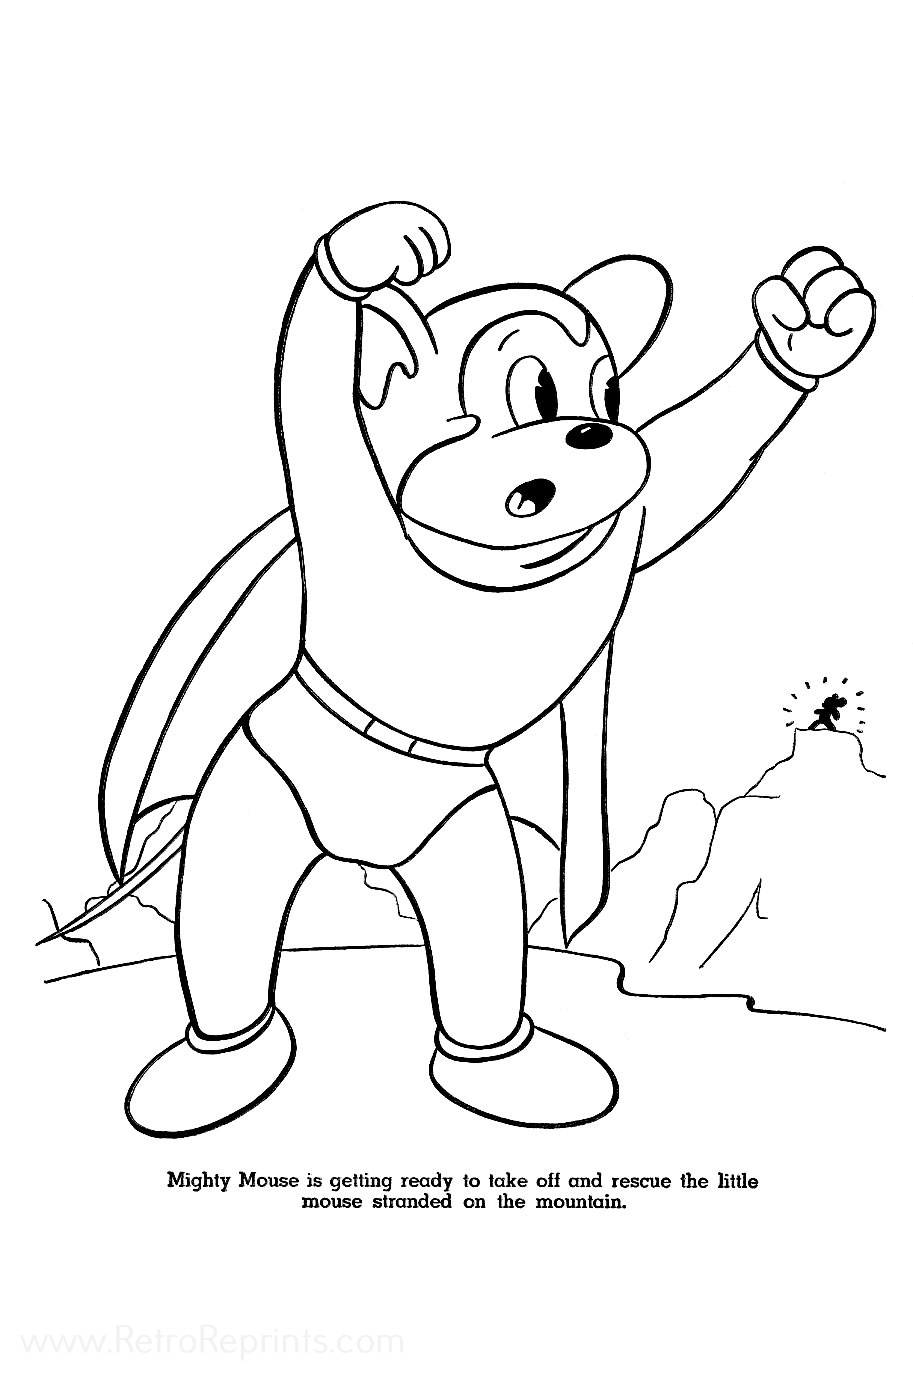 Mighty Mouse Coloring Pages | Coloring Books at Retro Reprints - The  world's largest coloring book archive!